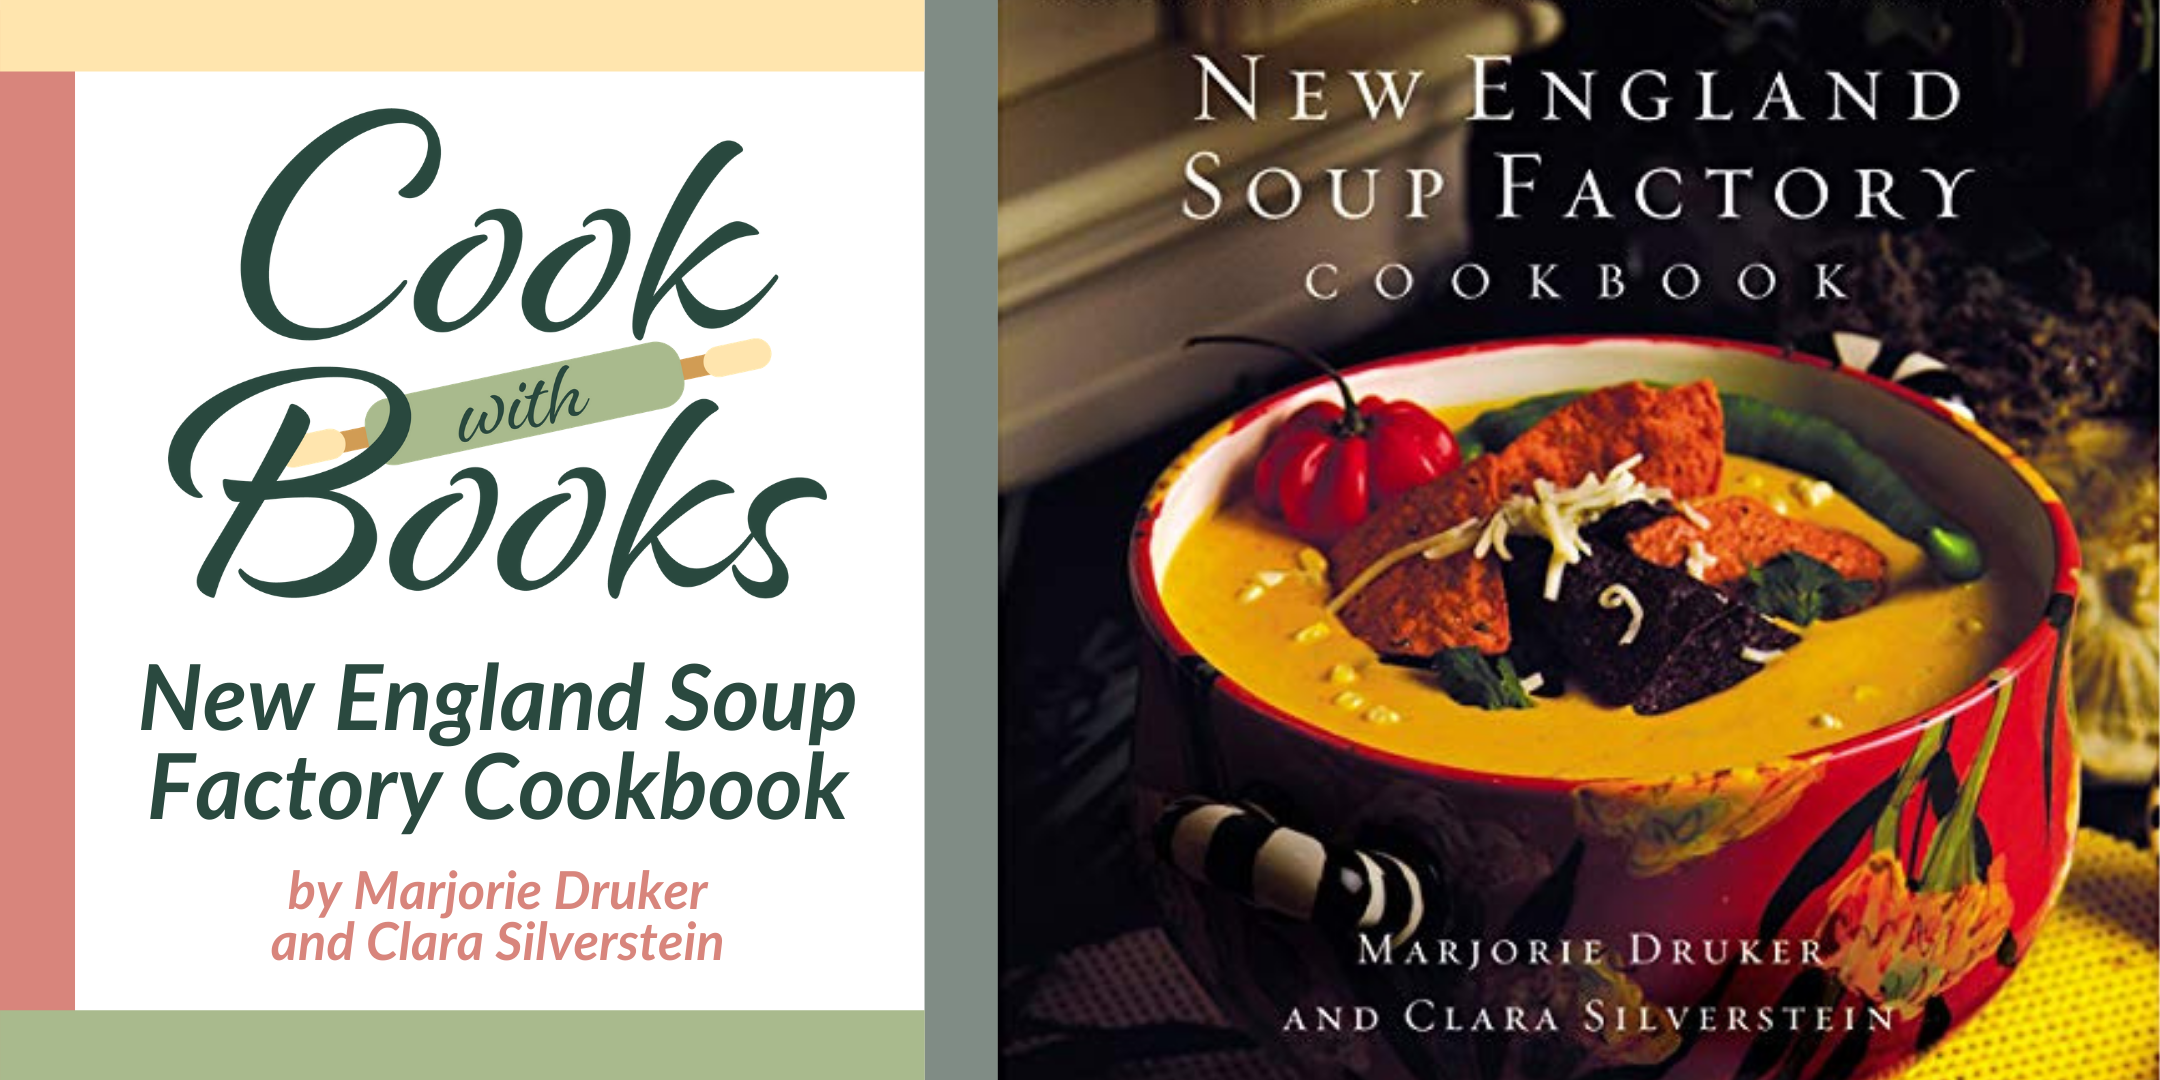 Cook with Books: New England Soup Factory Cookbook image